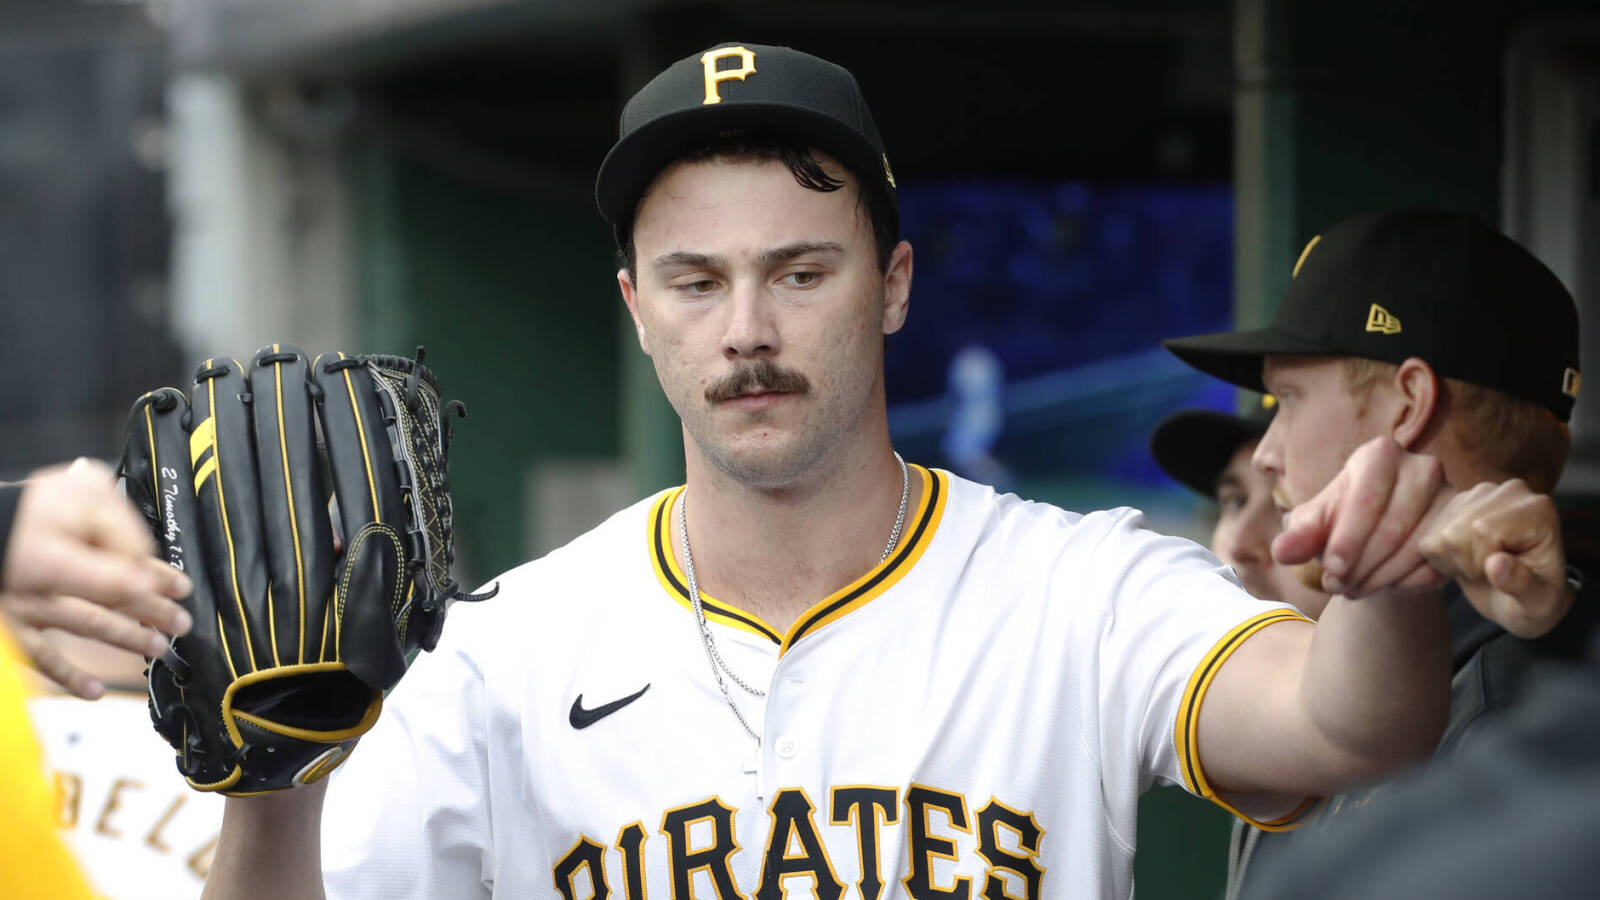 Paul Skenes experiences the Pirates' incompetence in just one game